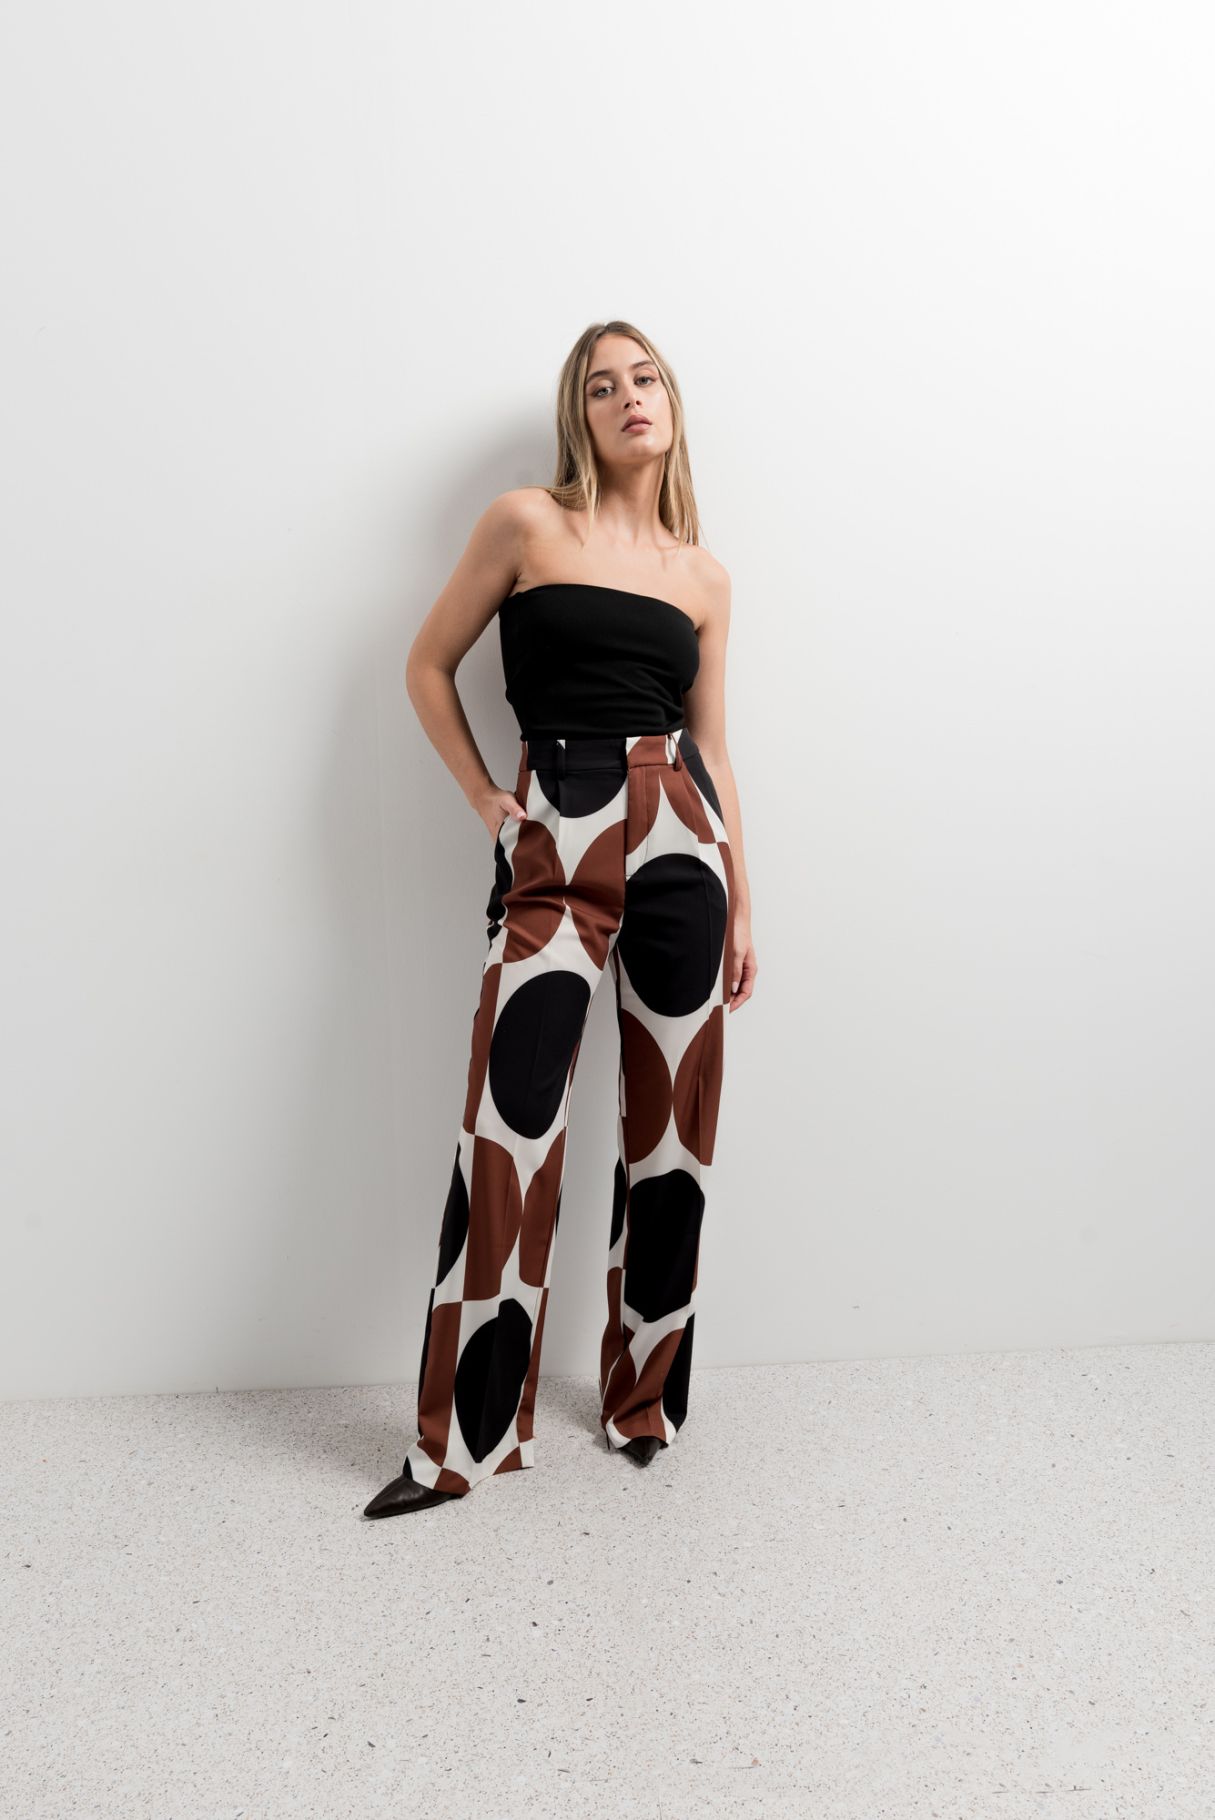 PRINTED TROUSERS